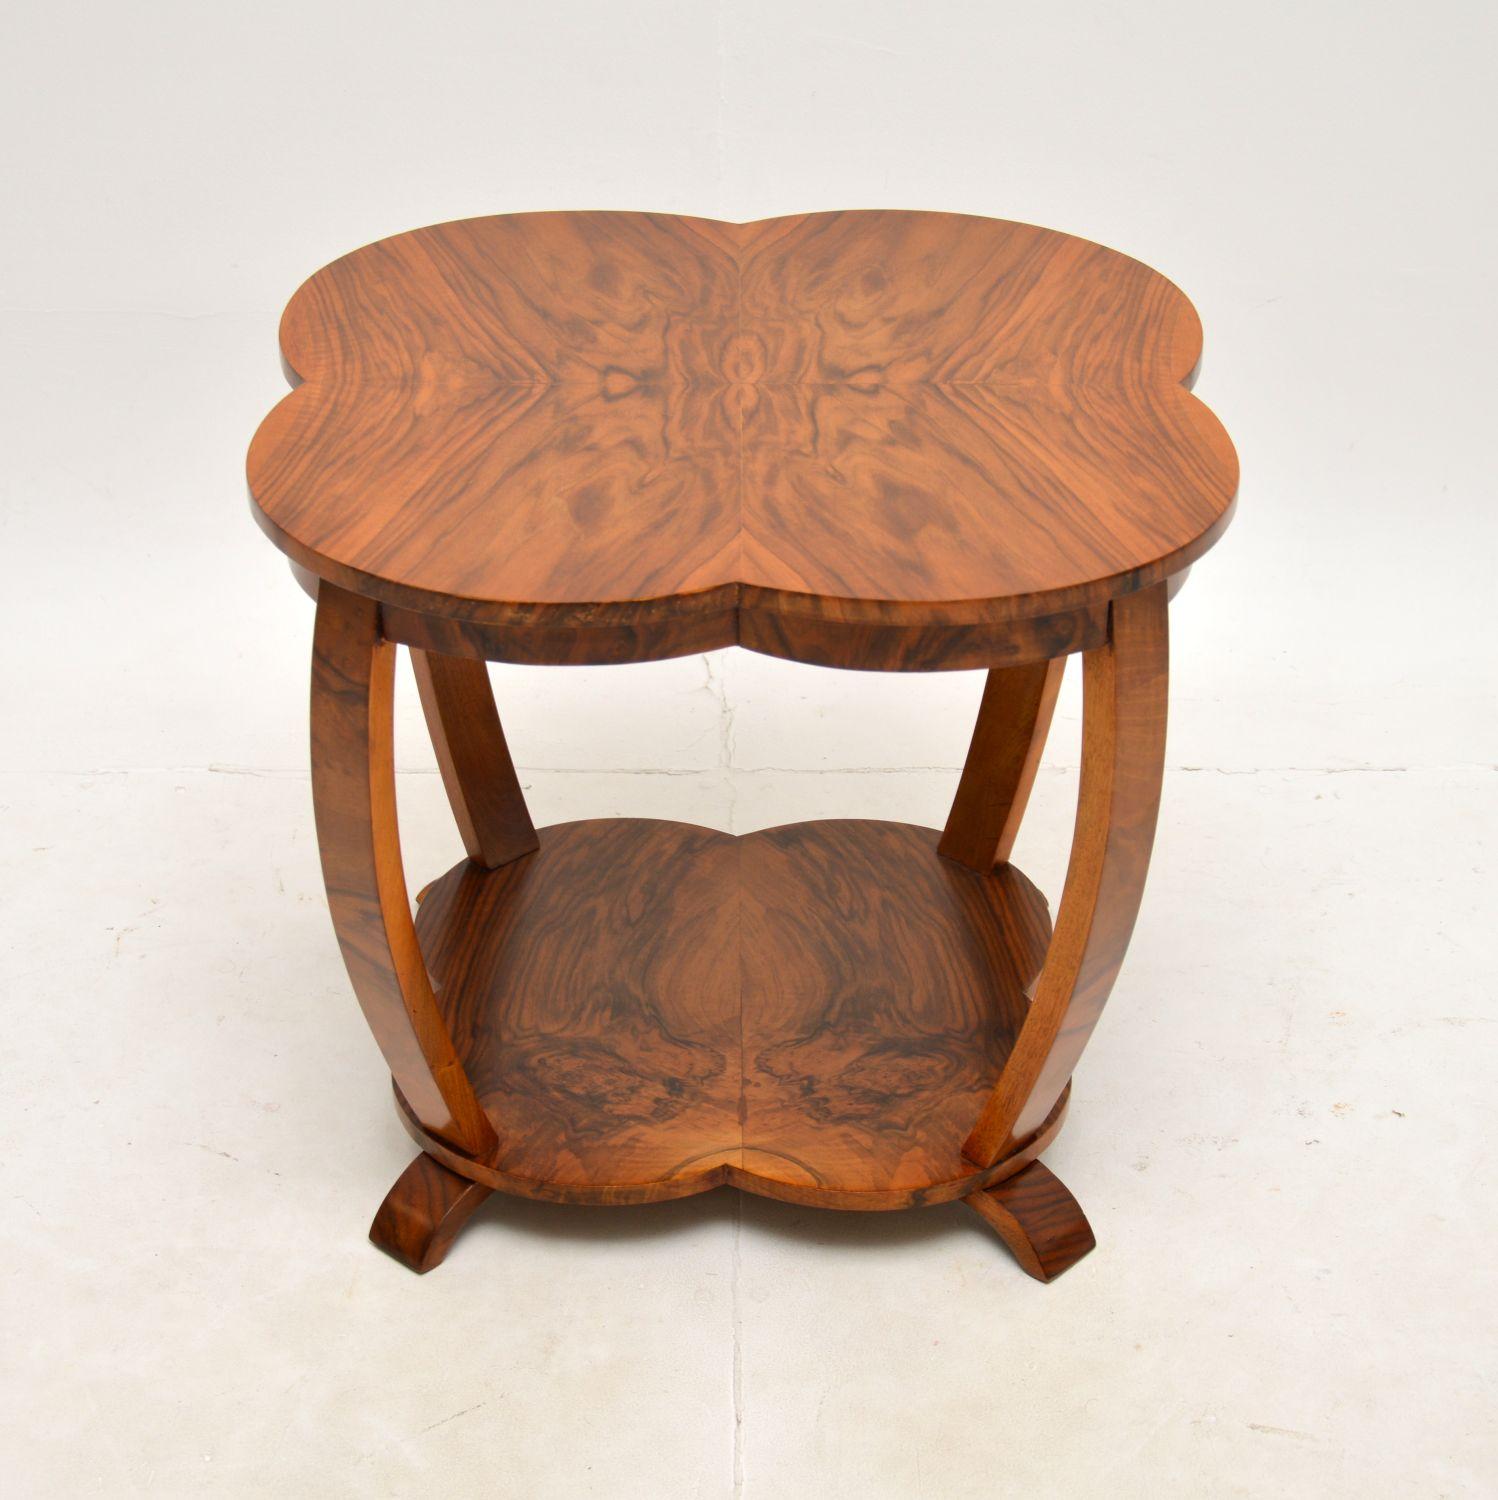 A stunning original Art Deco walnut occasional / coffee table. This was made in England, it dates from the 1930’s.

It is of superb quality and has a gorgeous design, with a four leaf clover shaped top. The figured walnut grain patterns are very